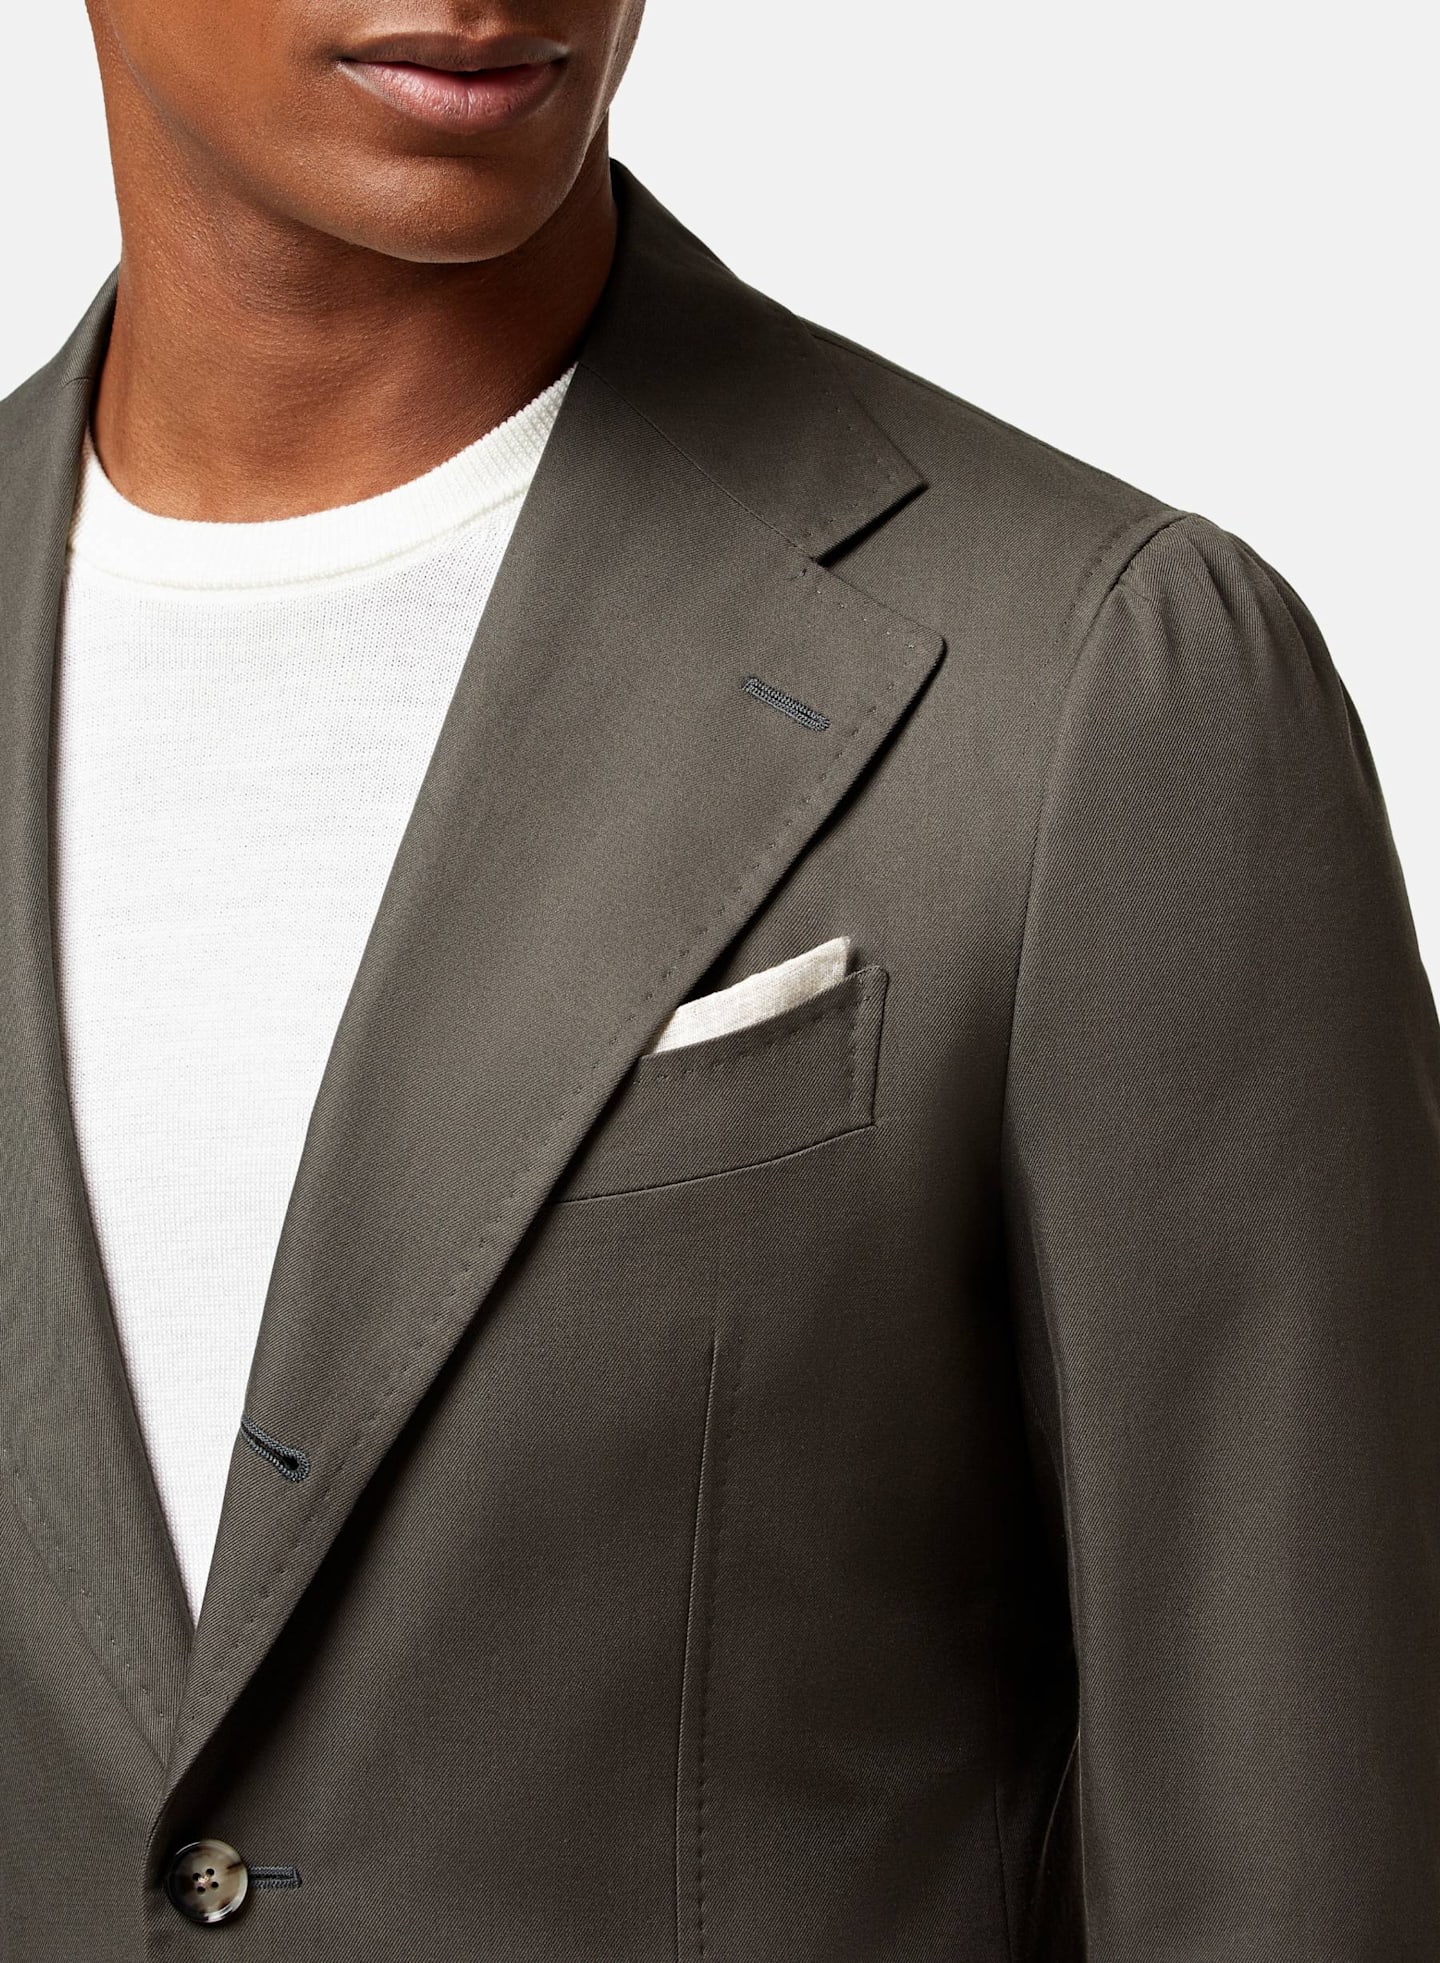 This single-breasted style features an extra button found raised into the lapel for a touch of aesthetic detail.